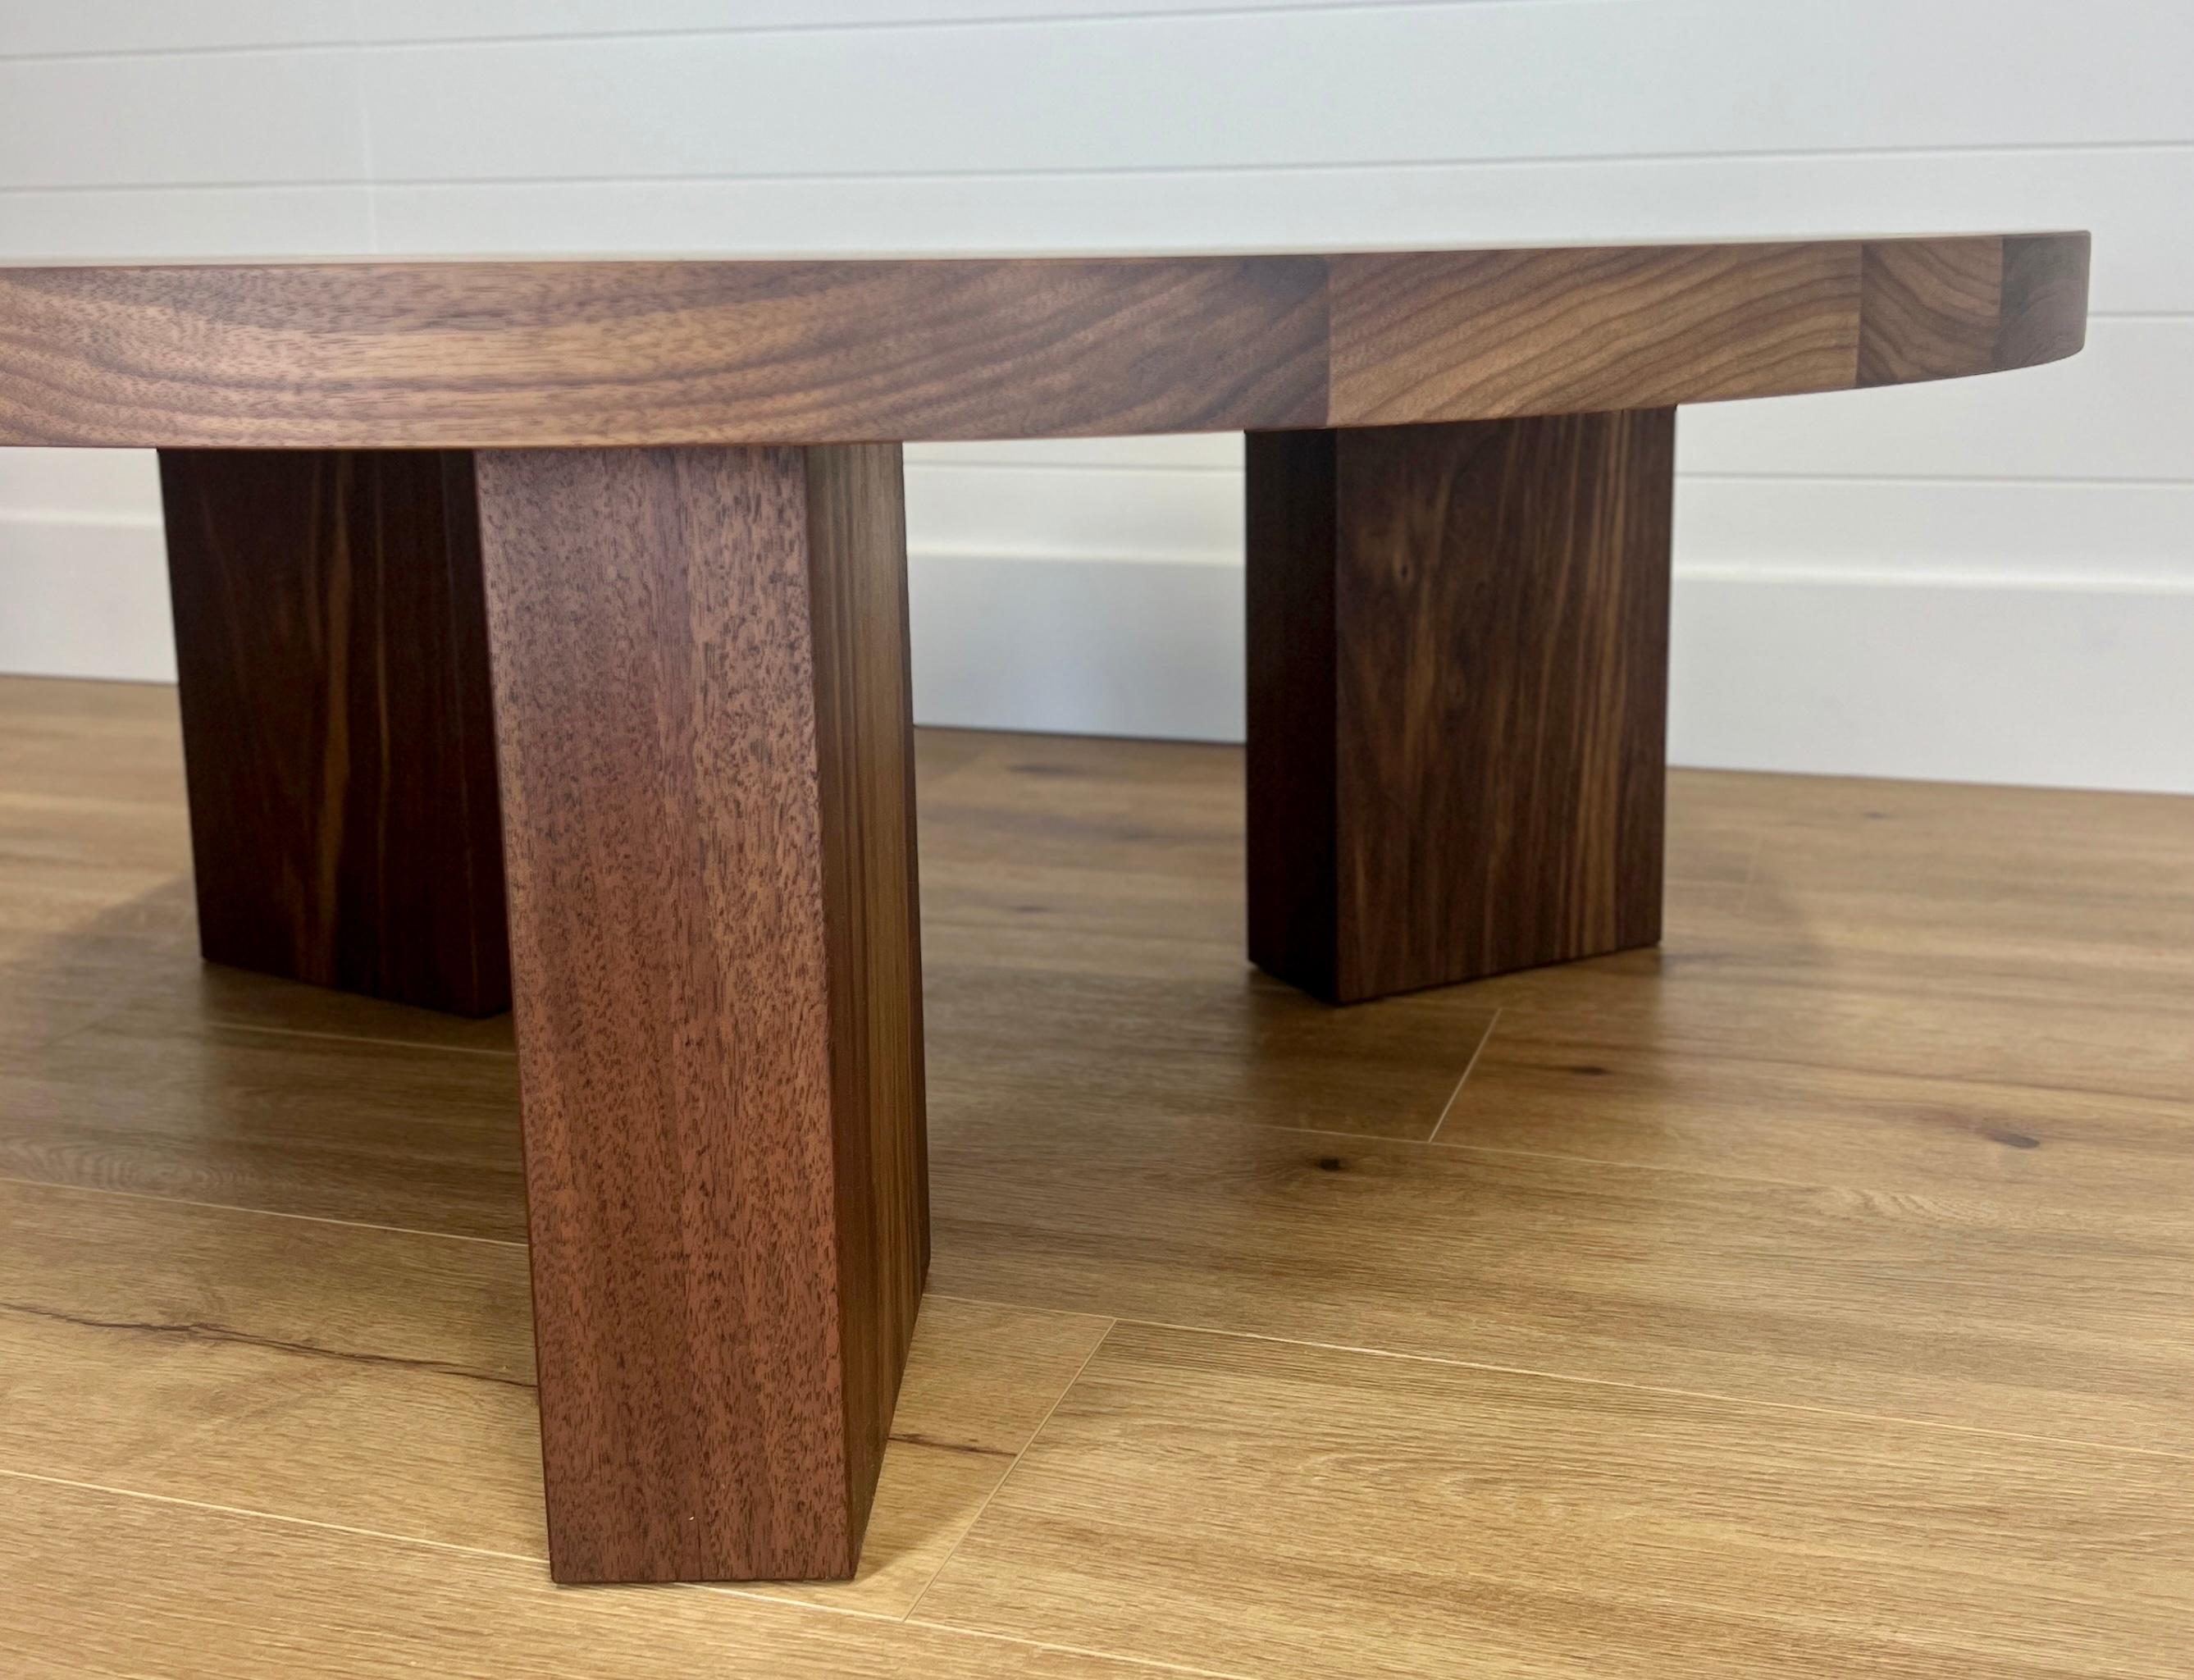 The OG is our signature table. This listing is for our Walnut version. 1.75” thick top sitting on a beefy 3 leg foundation. 

44×14 8/4 Walnut wood that is  finished with a no VOC matte walnut finish.
Made locally in our Hermosa Beach studio.

8-10